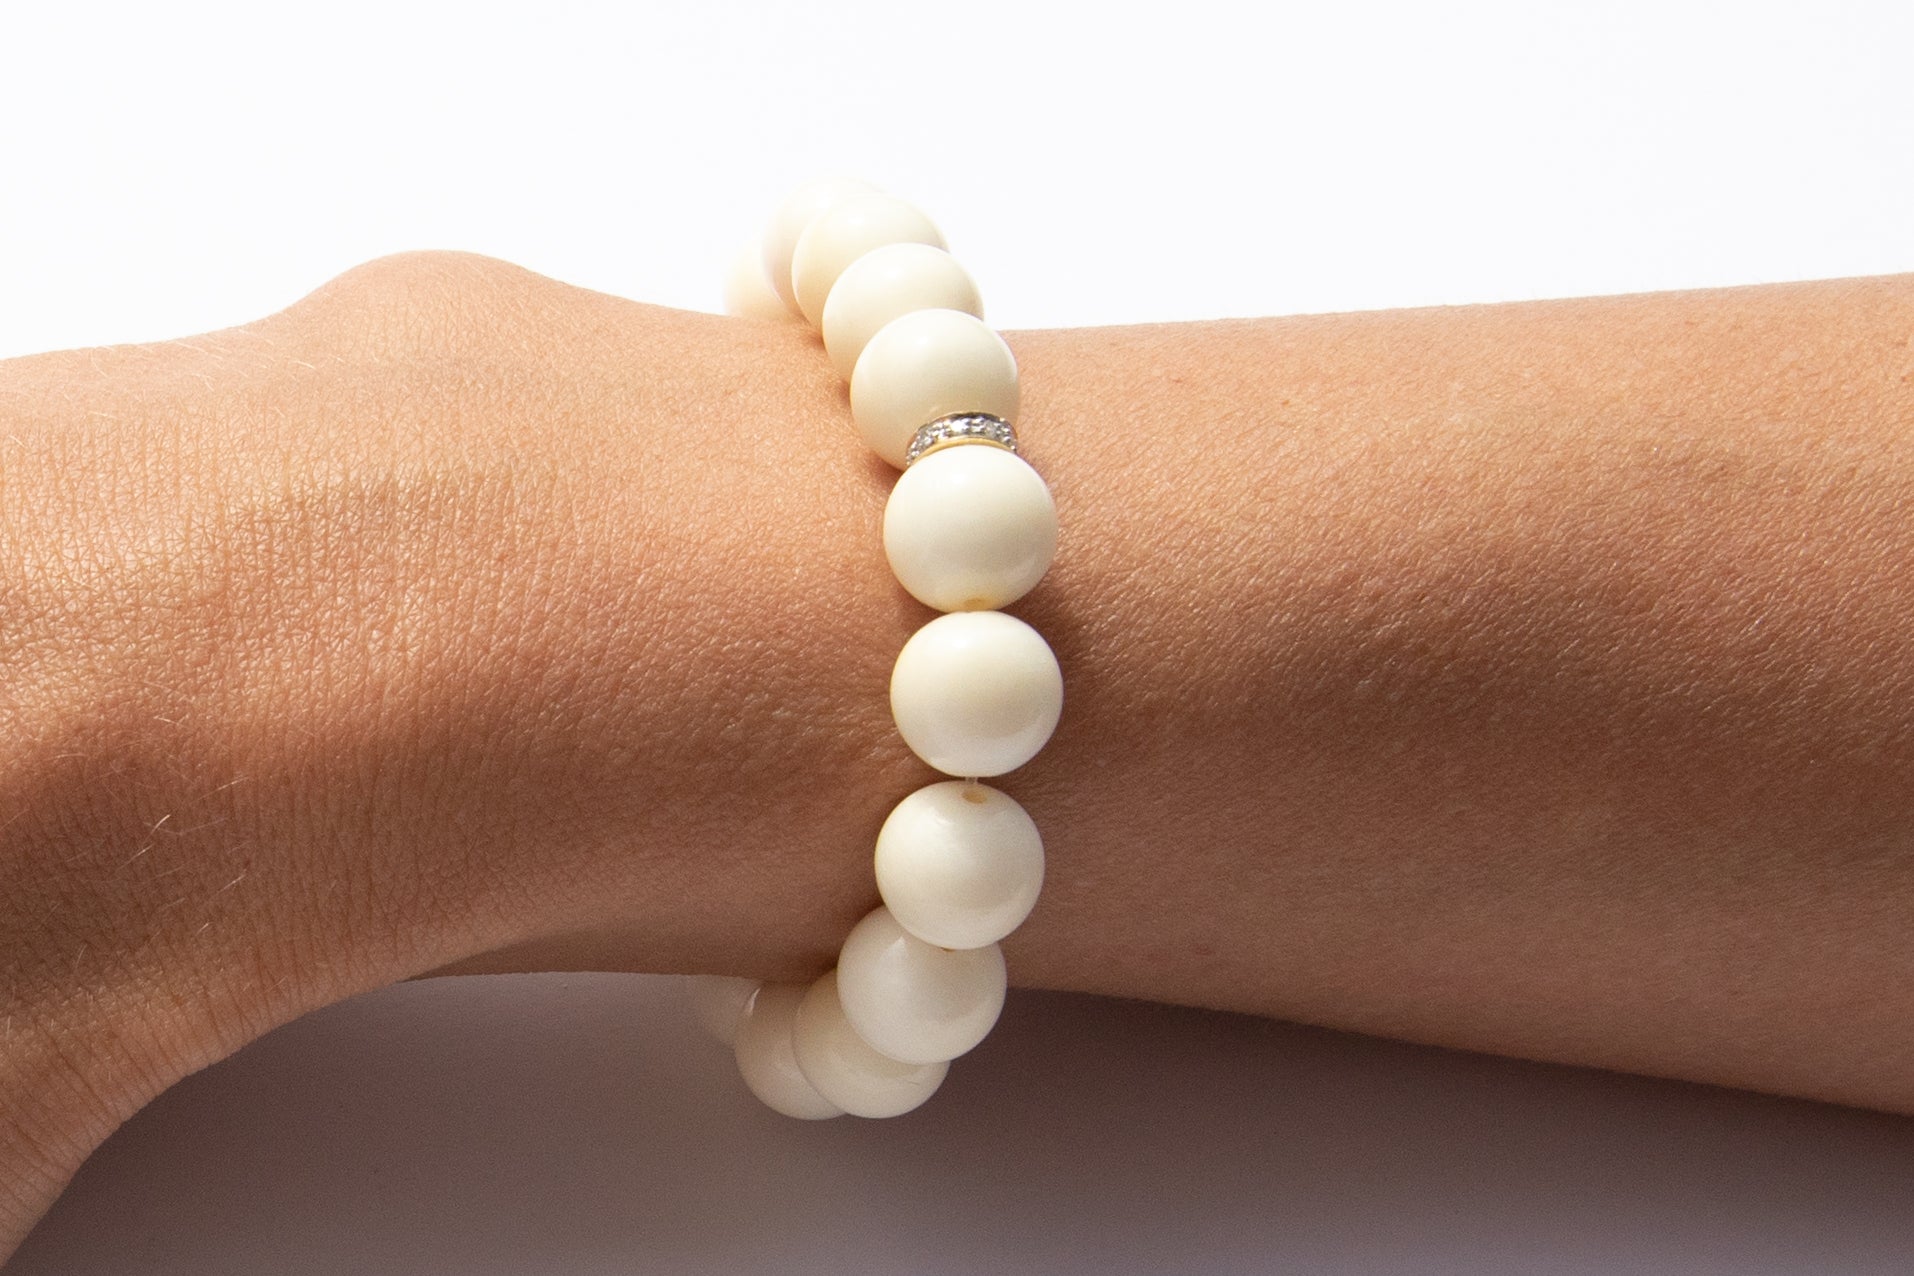 White Bone Beaded Bracelet With Pavé Diamonds Set in 14k Yellow Gold Featured on Arm